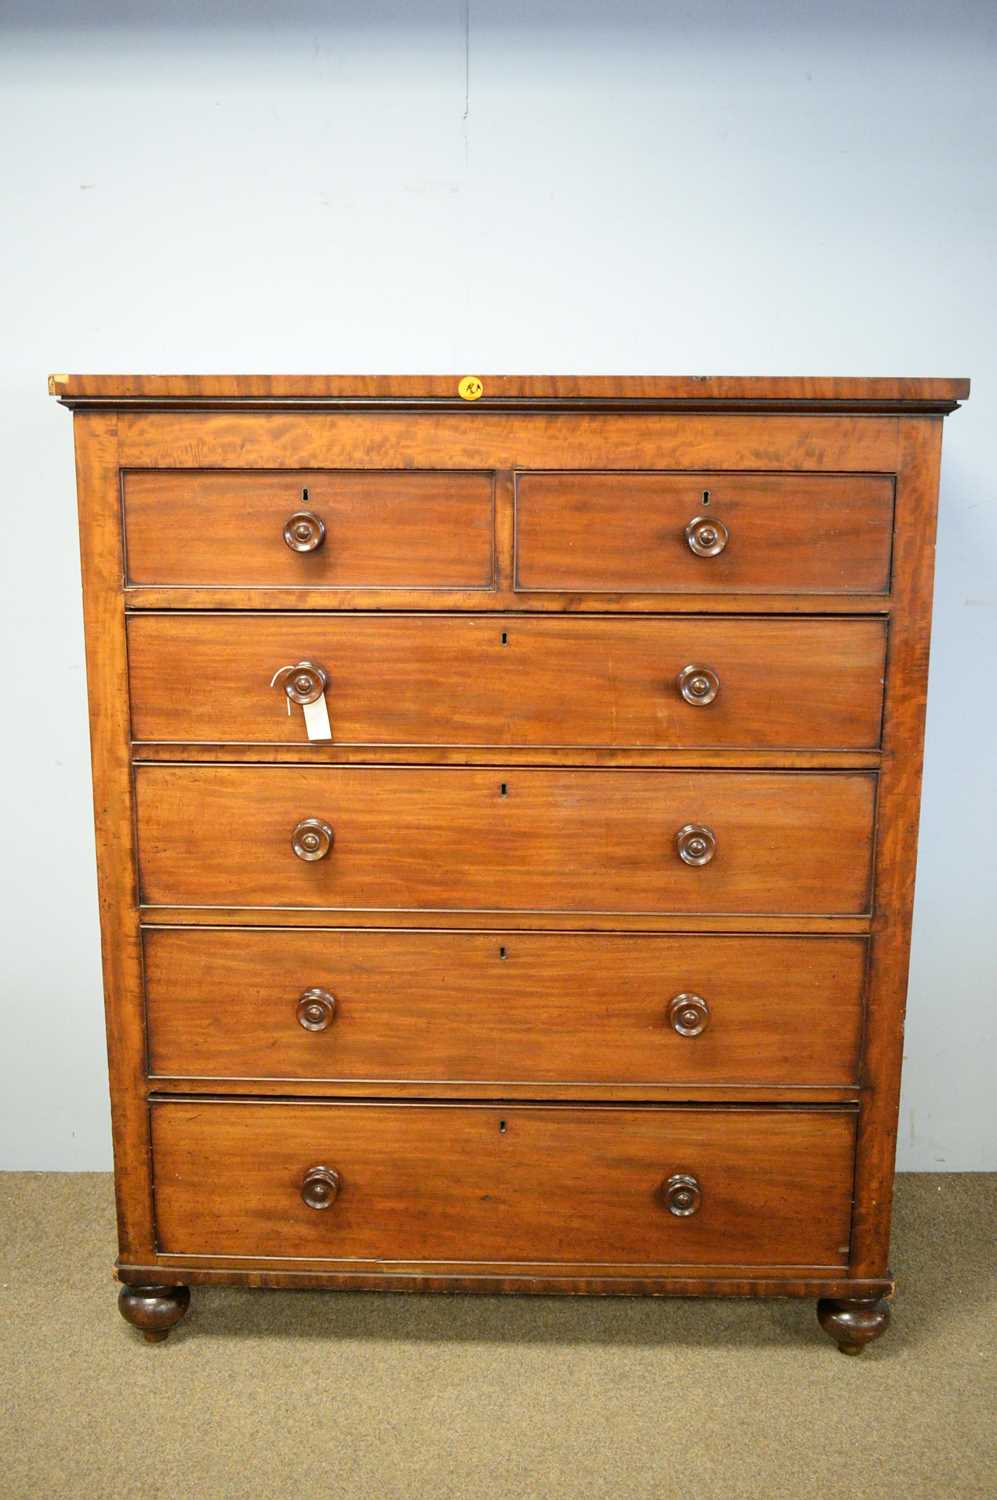 Lot 104 - An impressive Victorian mahogany chest of drawers.